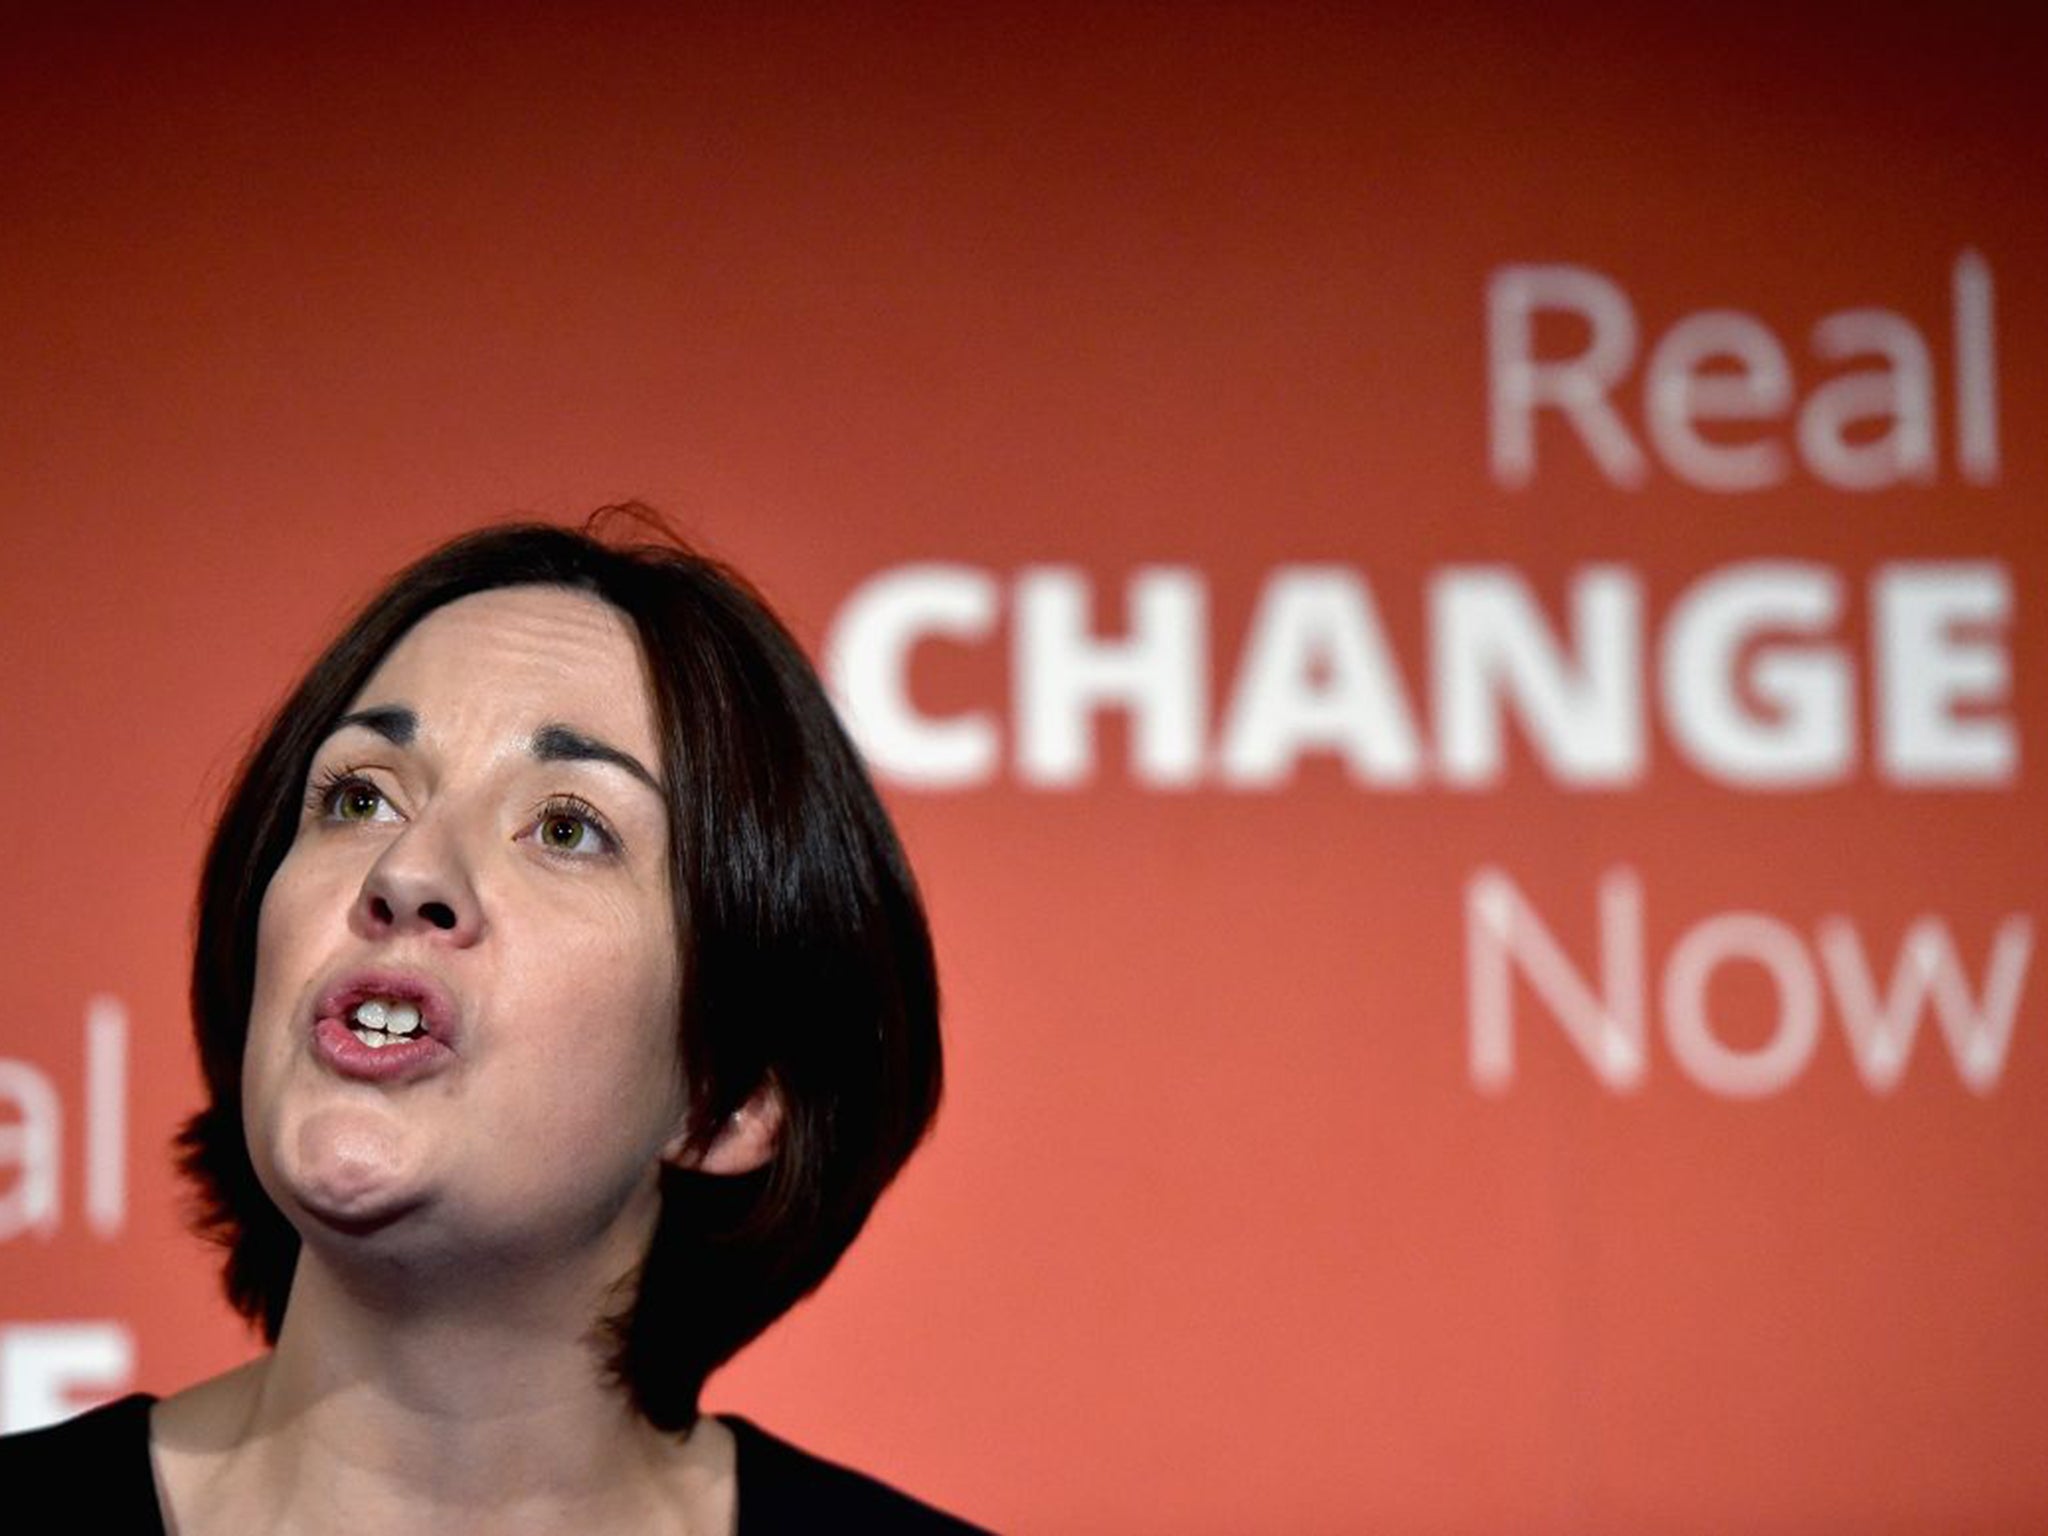 Scottish Labour leader Kezia Dugdale gives her keynote speech to the party conference at the Glasgow Science Centre on 19 March